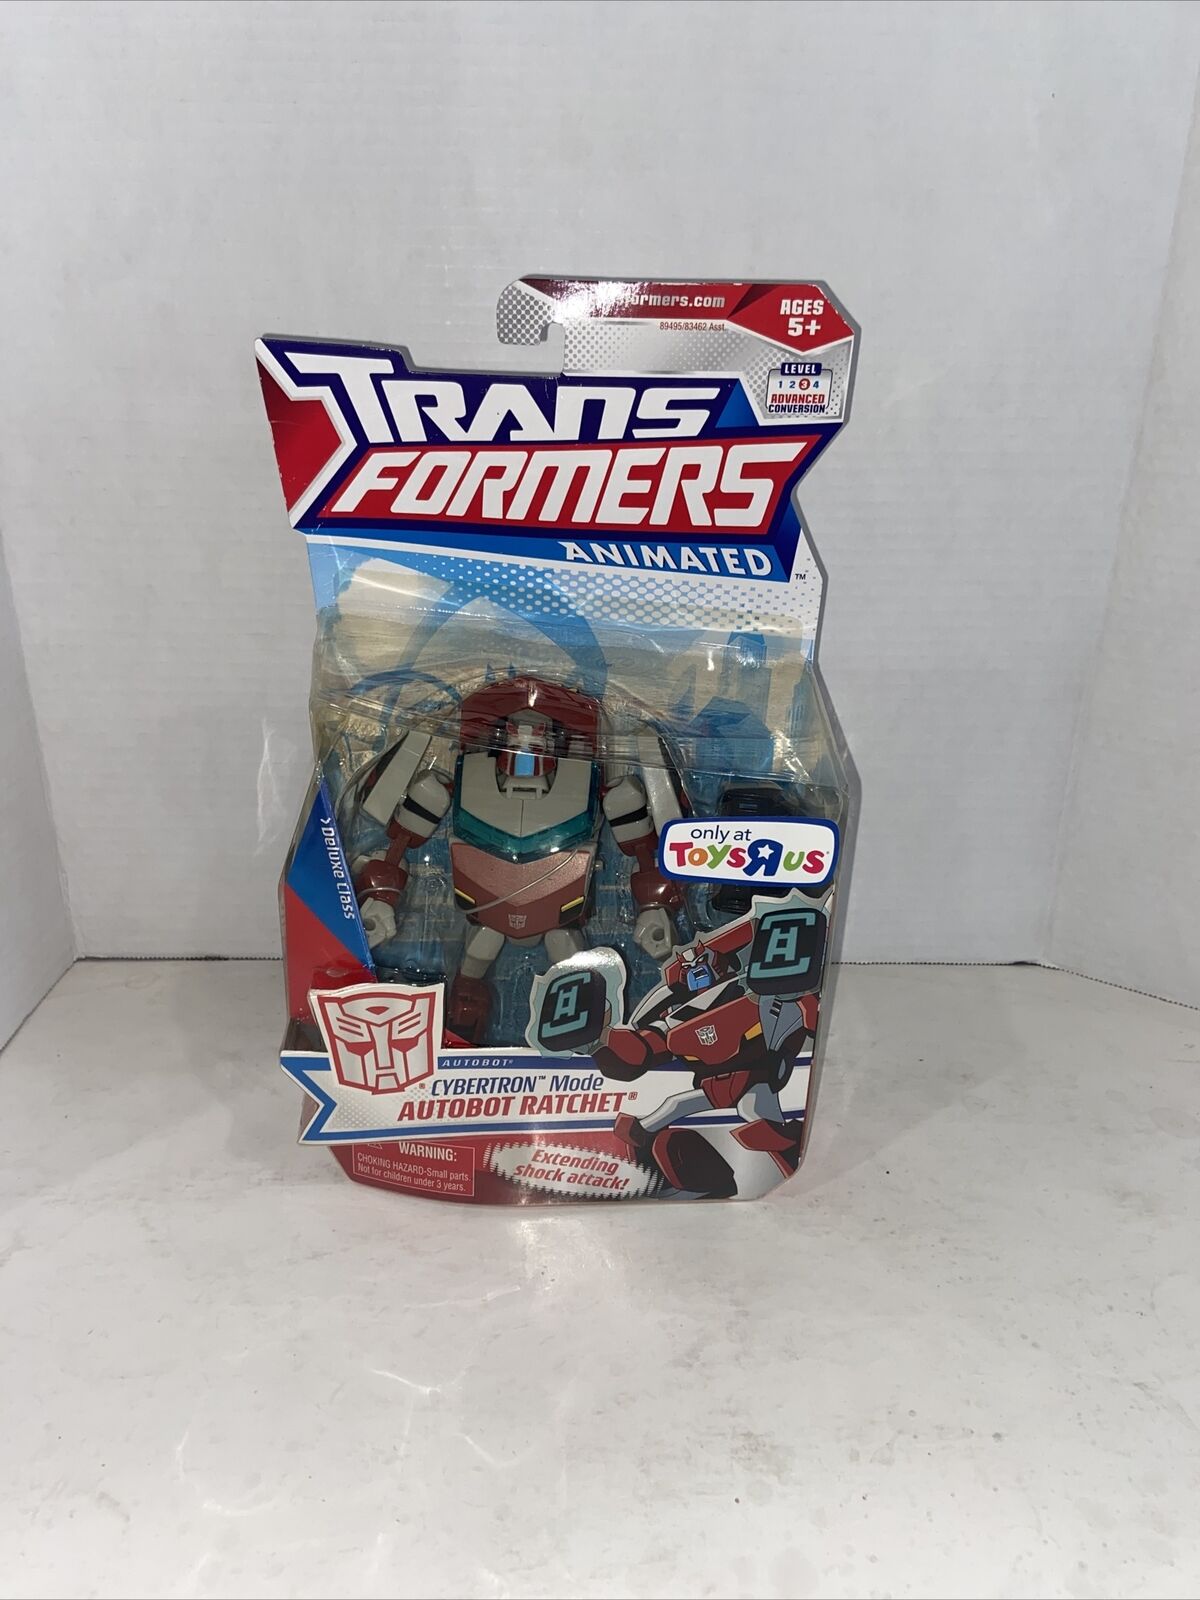 Transformers Animated Cybertron Mode Autobot Ratchet MOSC Deluxe Hasbro TRU 2010